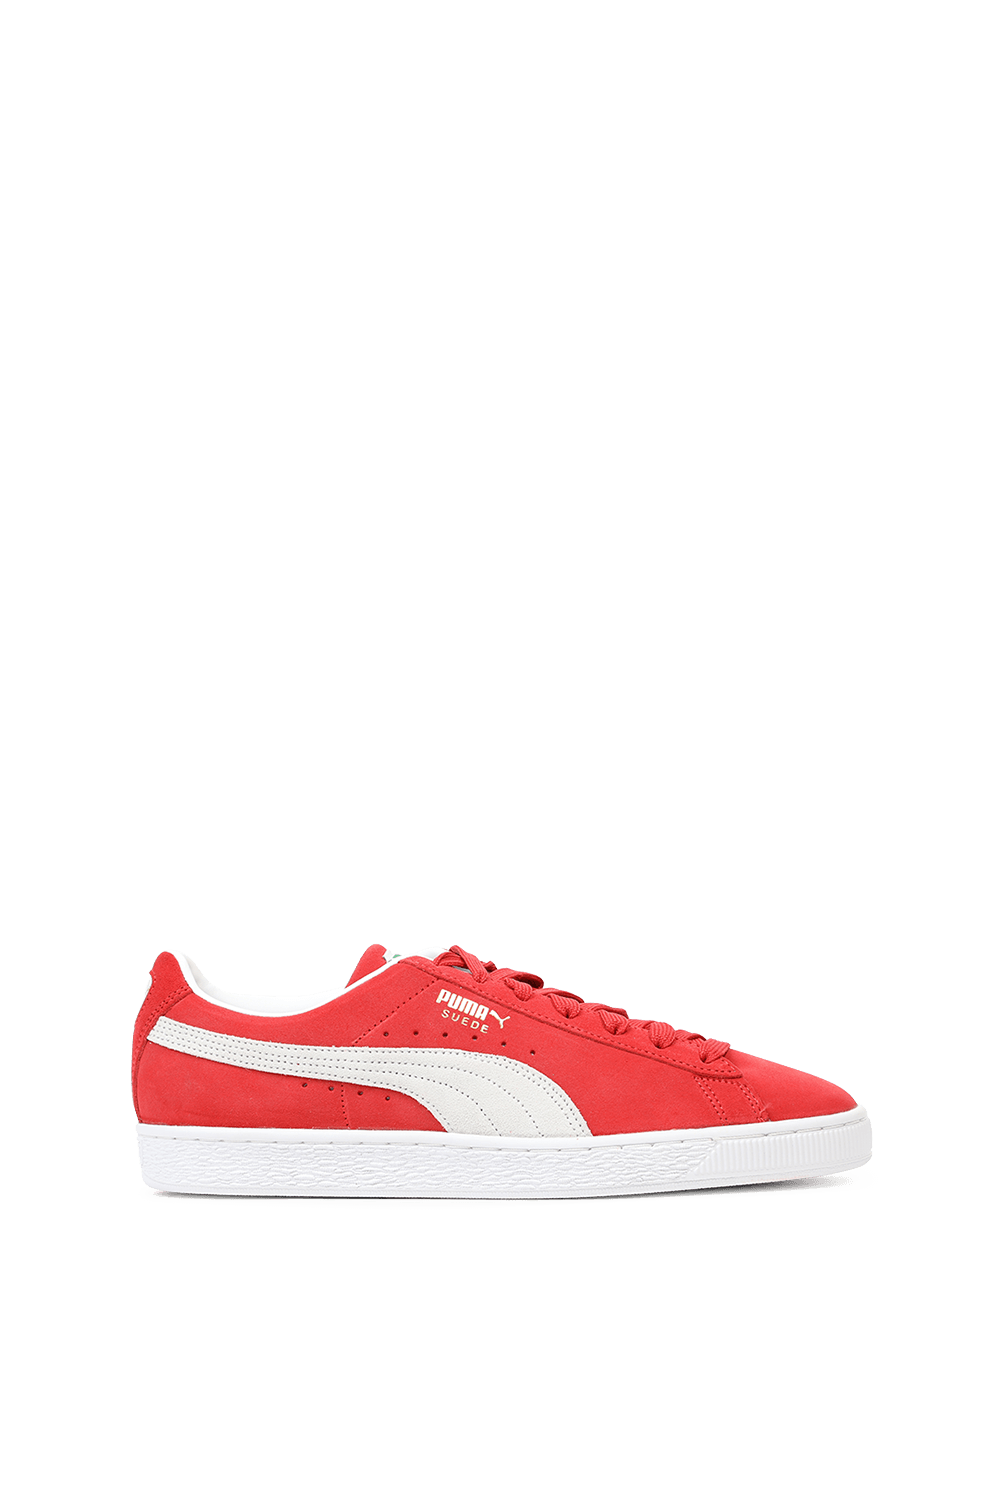 red pumas on sale